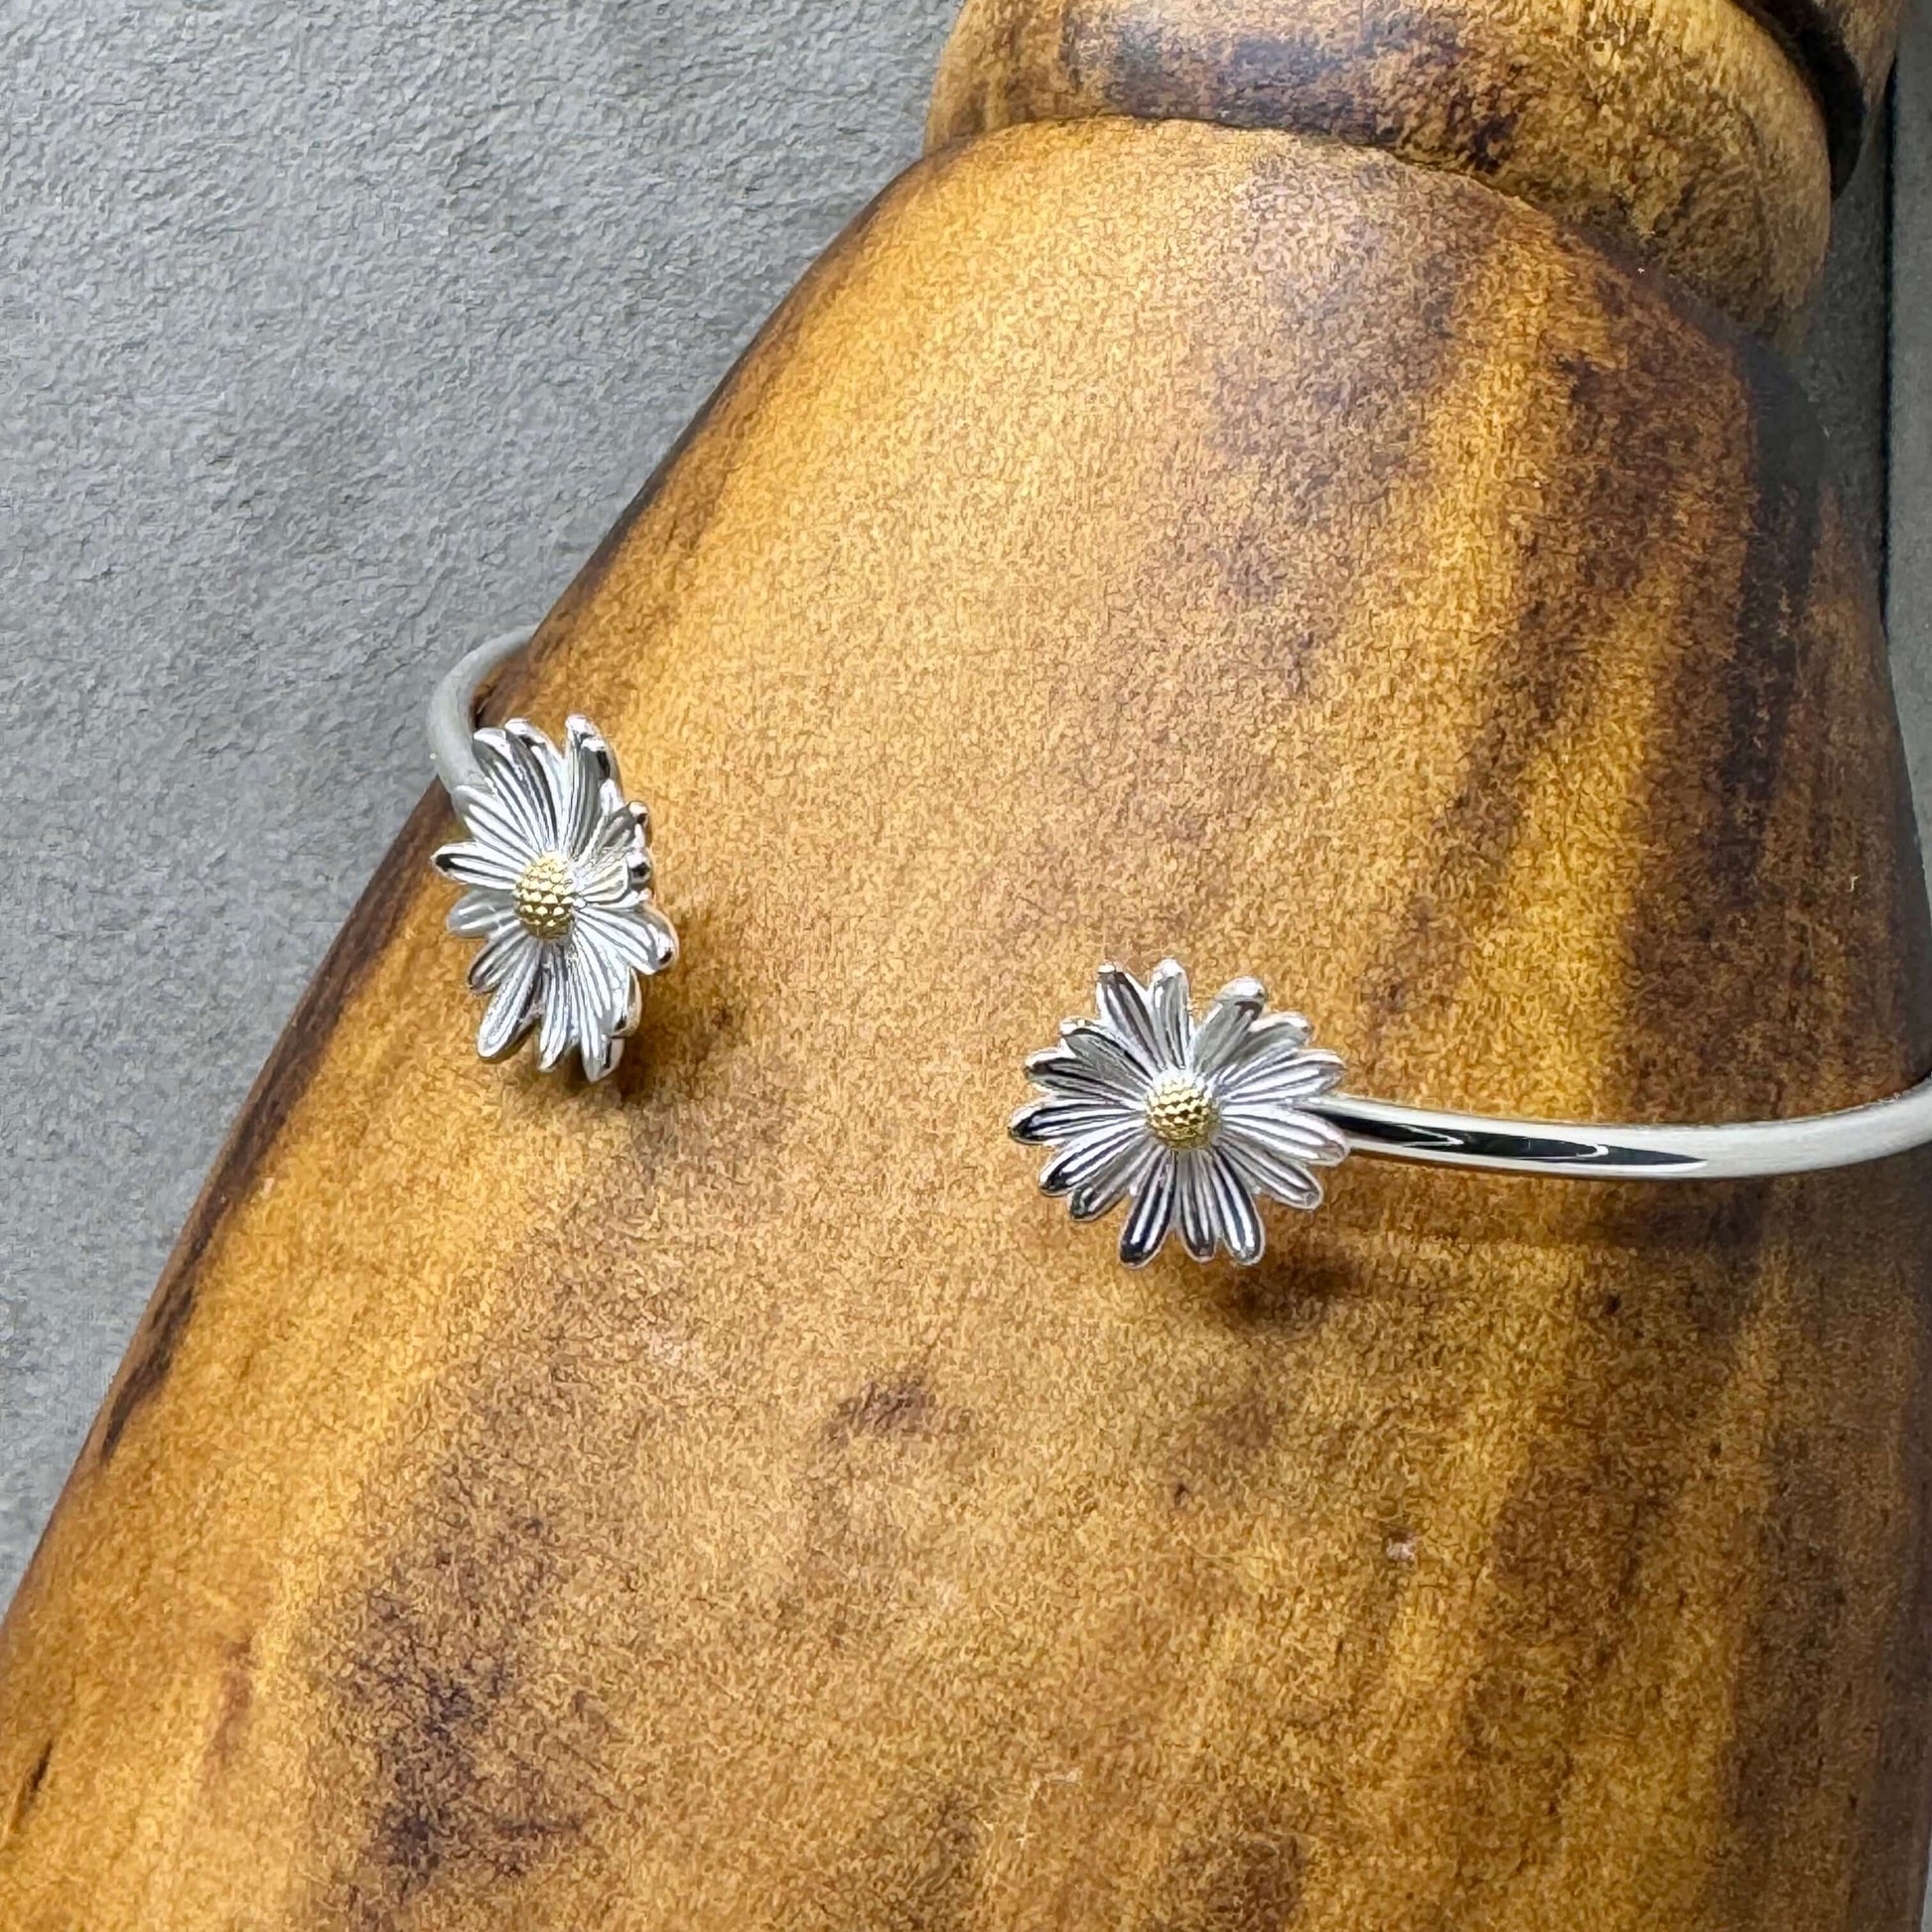 Daisy Two Tone Sterling Silver Flower Cuff Bangle - Twelve Silver Trees